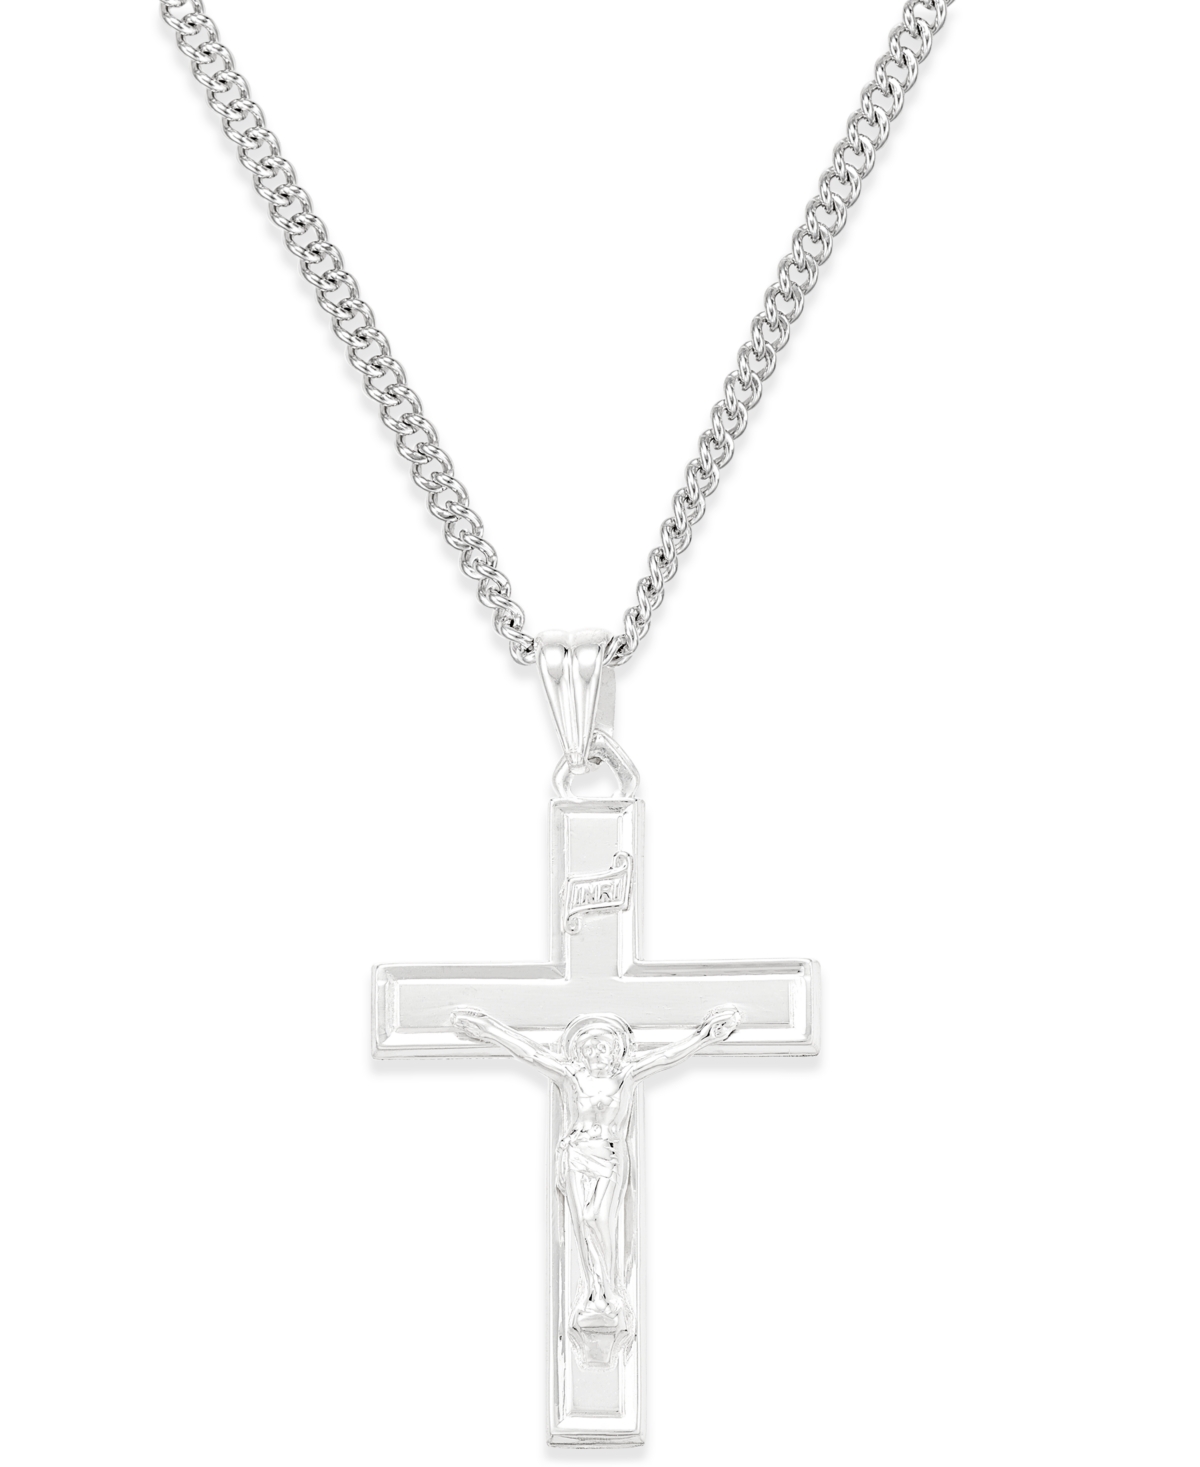 Crucifix Pendant Necklace in Sterling Silver - Silver